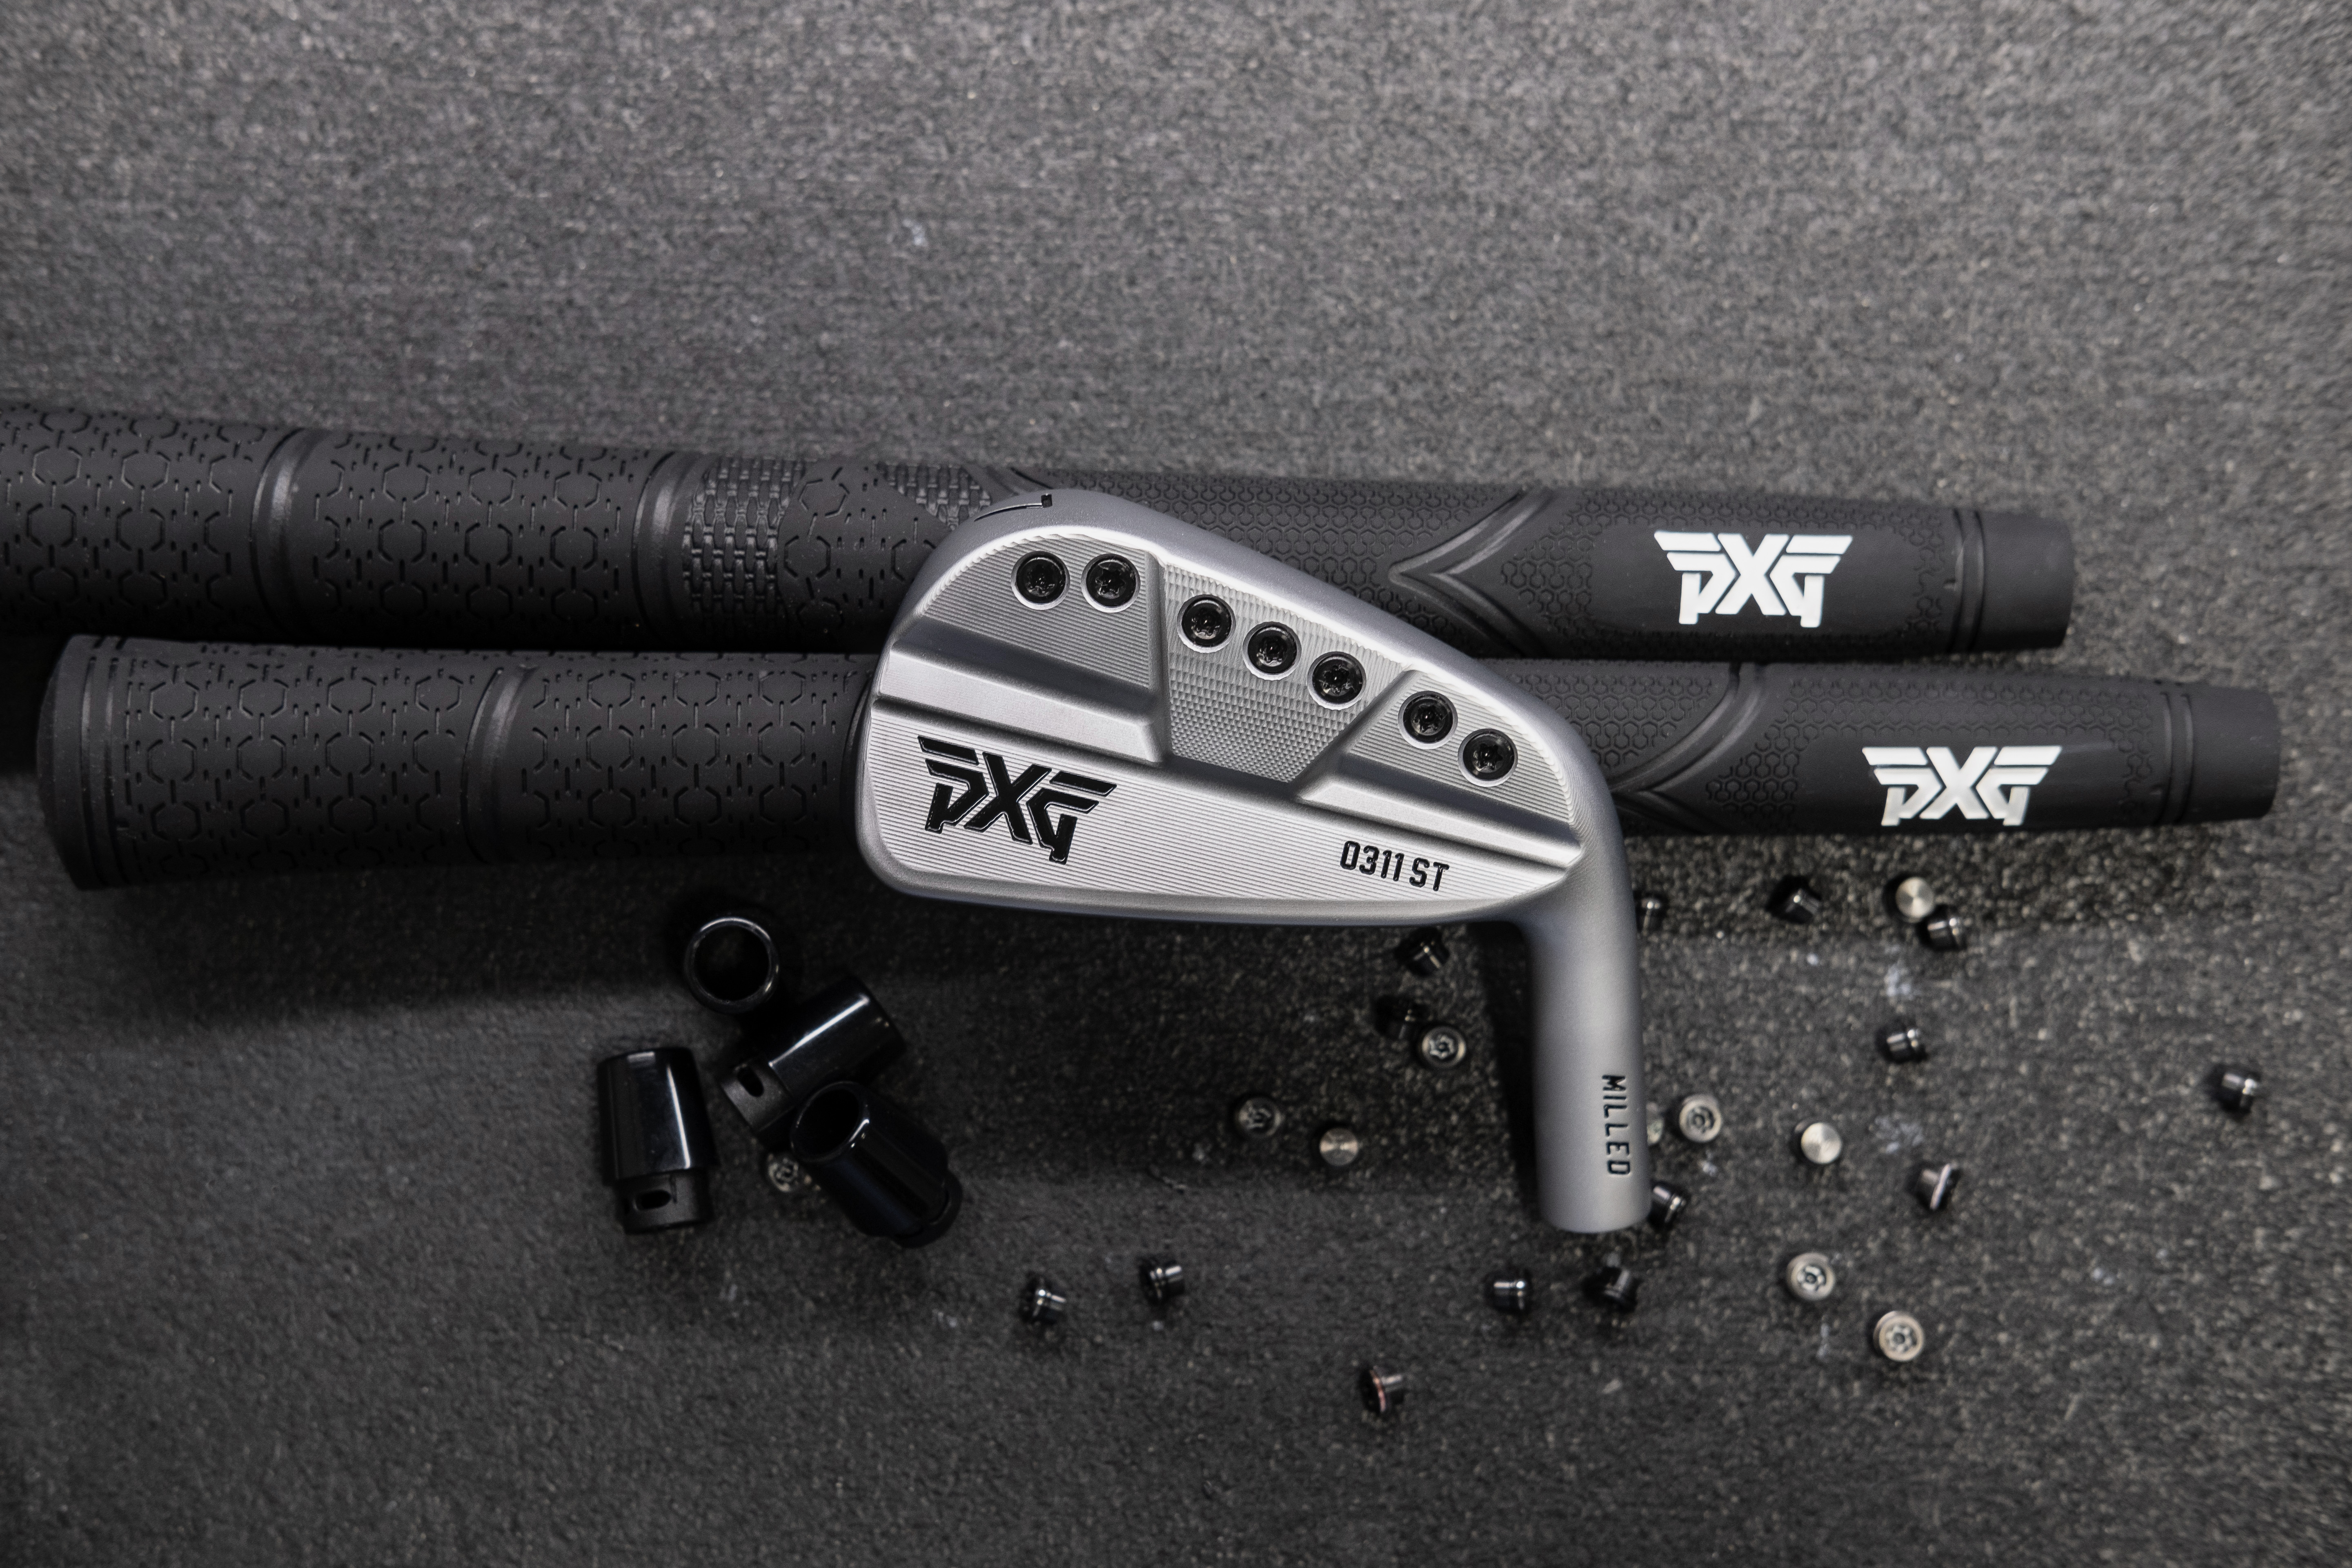 PXG 0311 ST irons are something very special - FIRST LOOK 